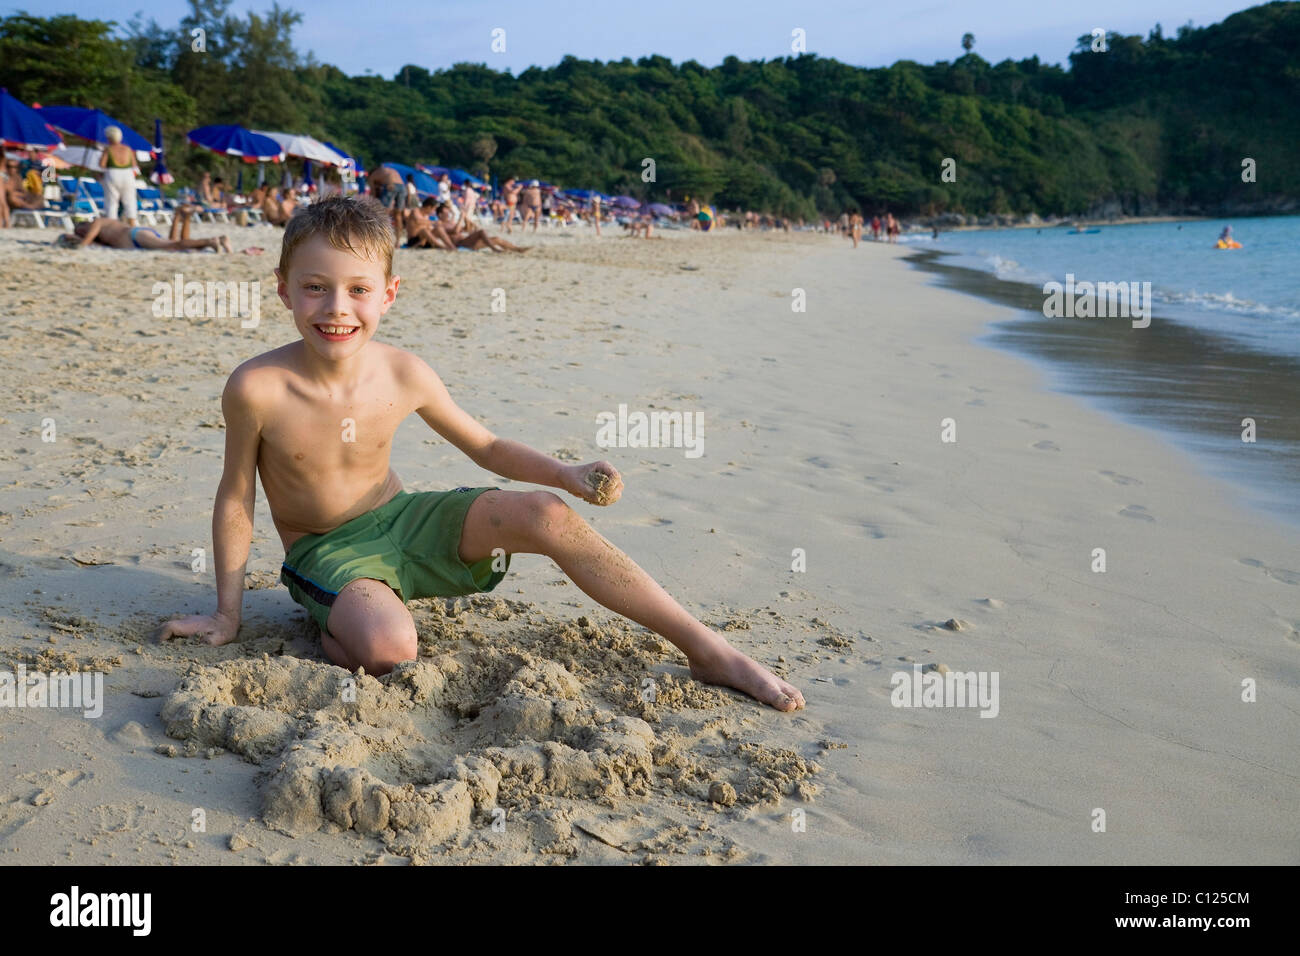 Boy, 7 years old, on a beach in Phuket, Southern Thailand, Thailand, Southeast Asia Stock Photo